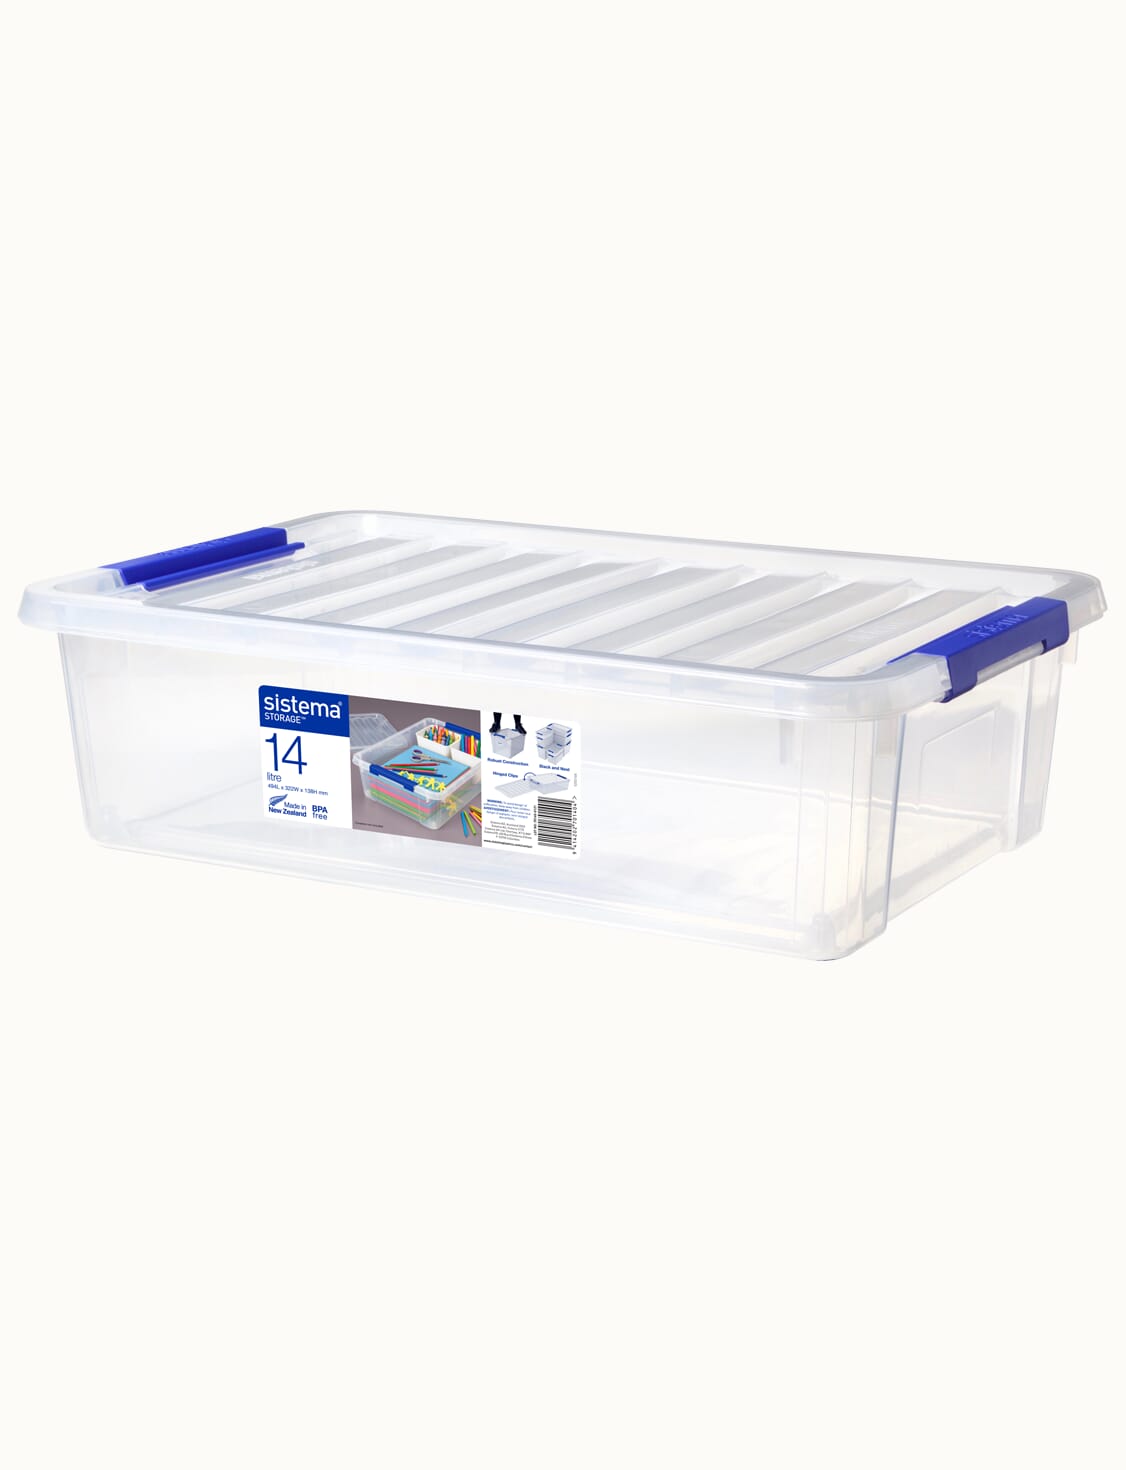 Clip Top Small Storage Boxes With Clip Lid & Carry Handles. For